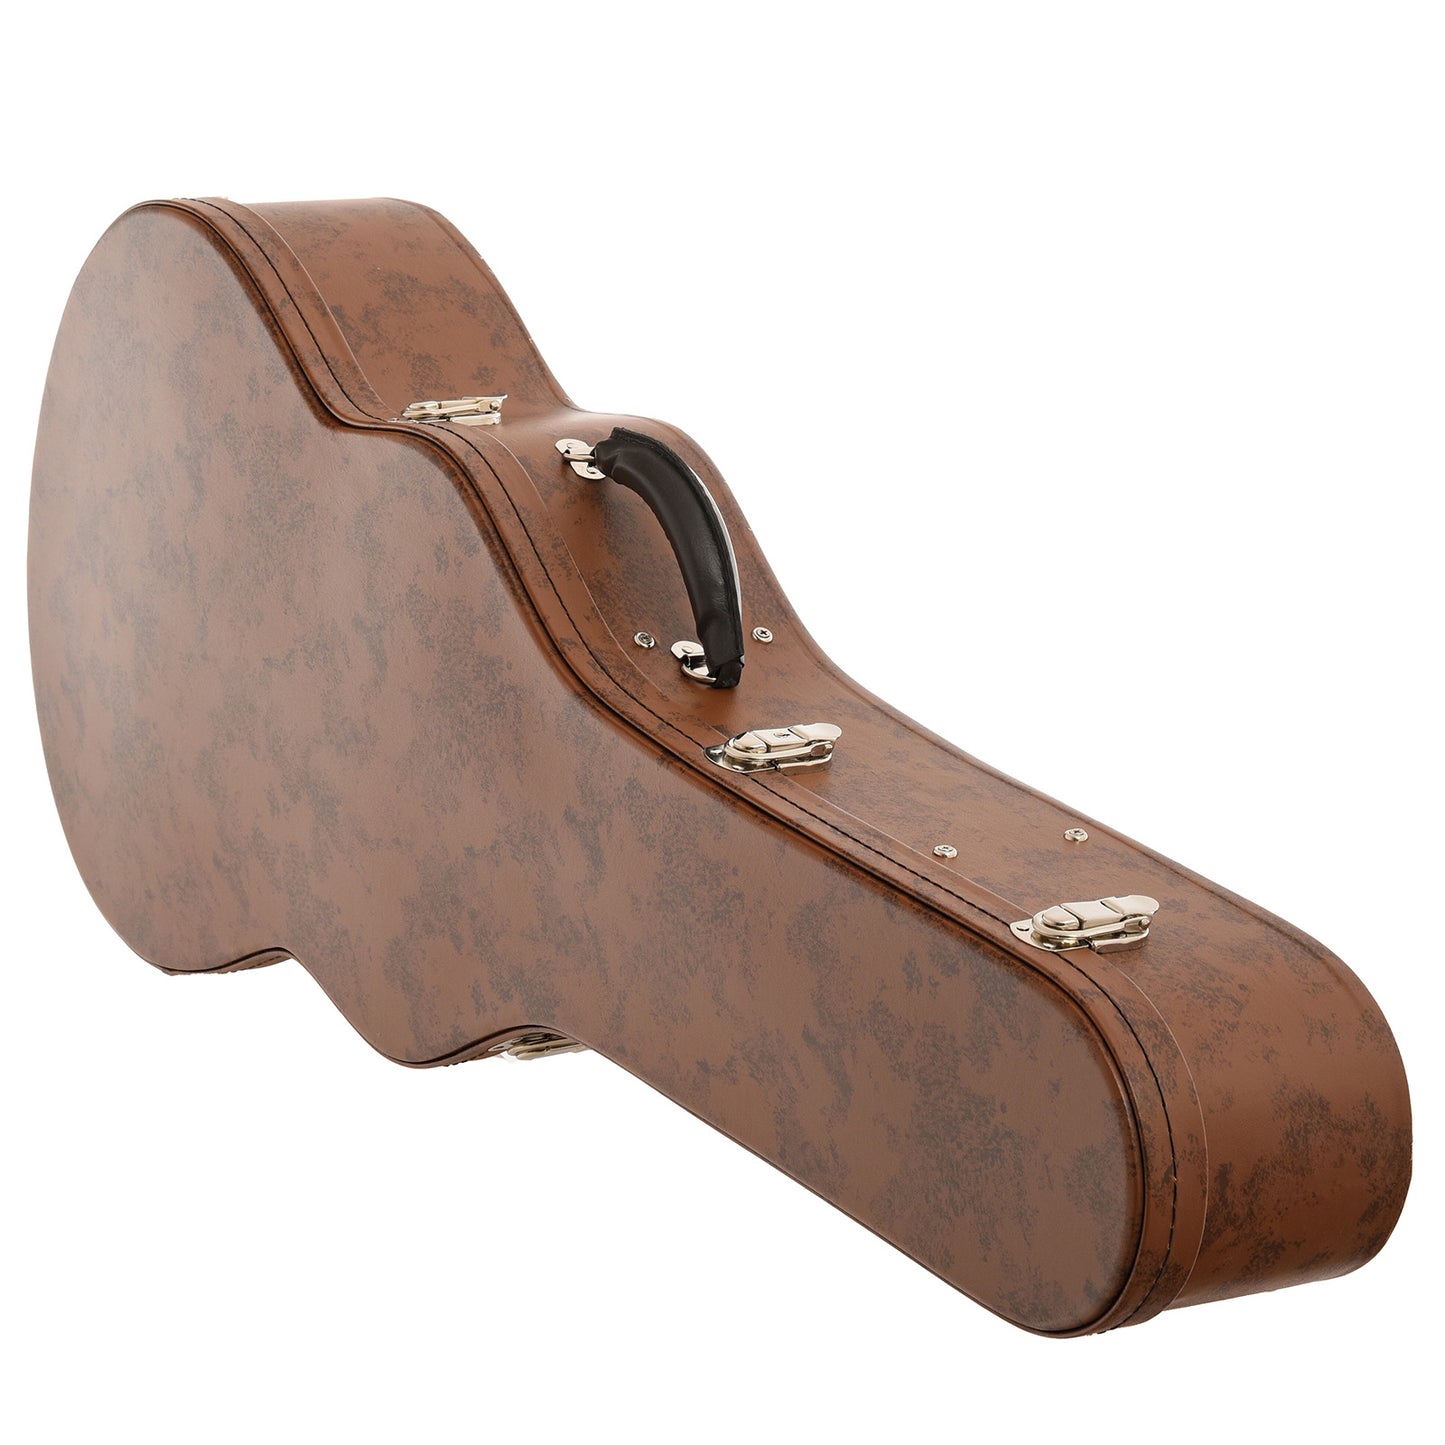 Case for Bedell Limited Edition Fireside Parlor Koa